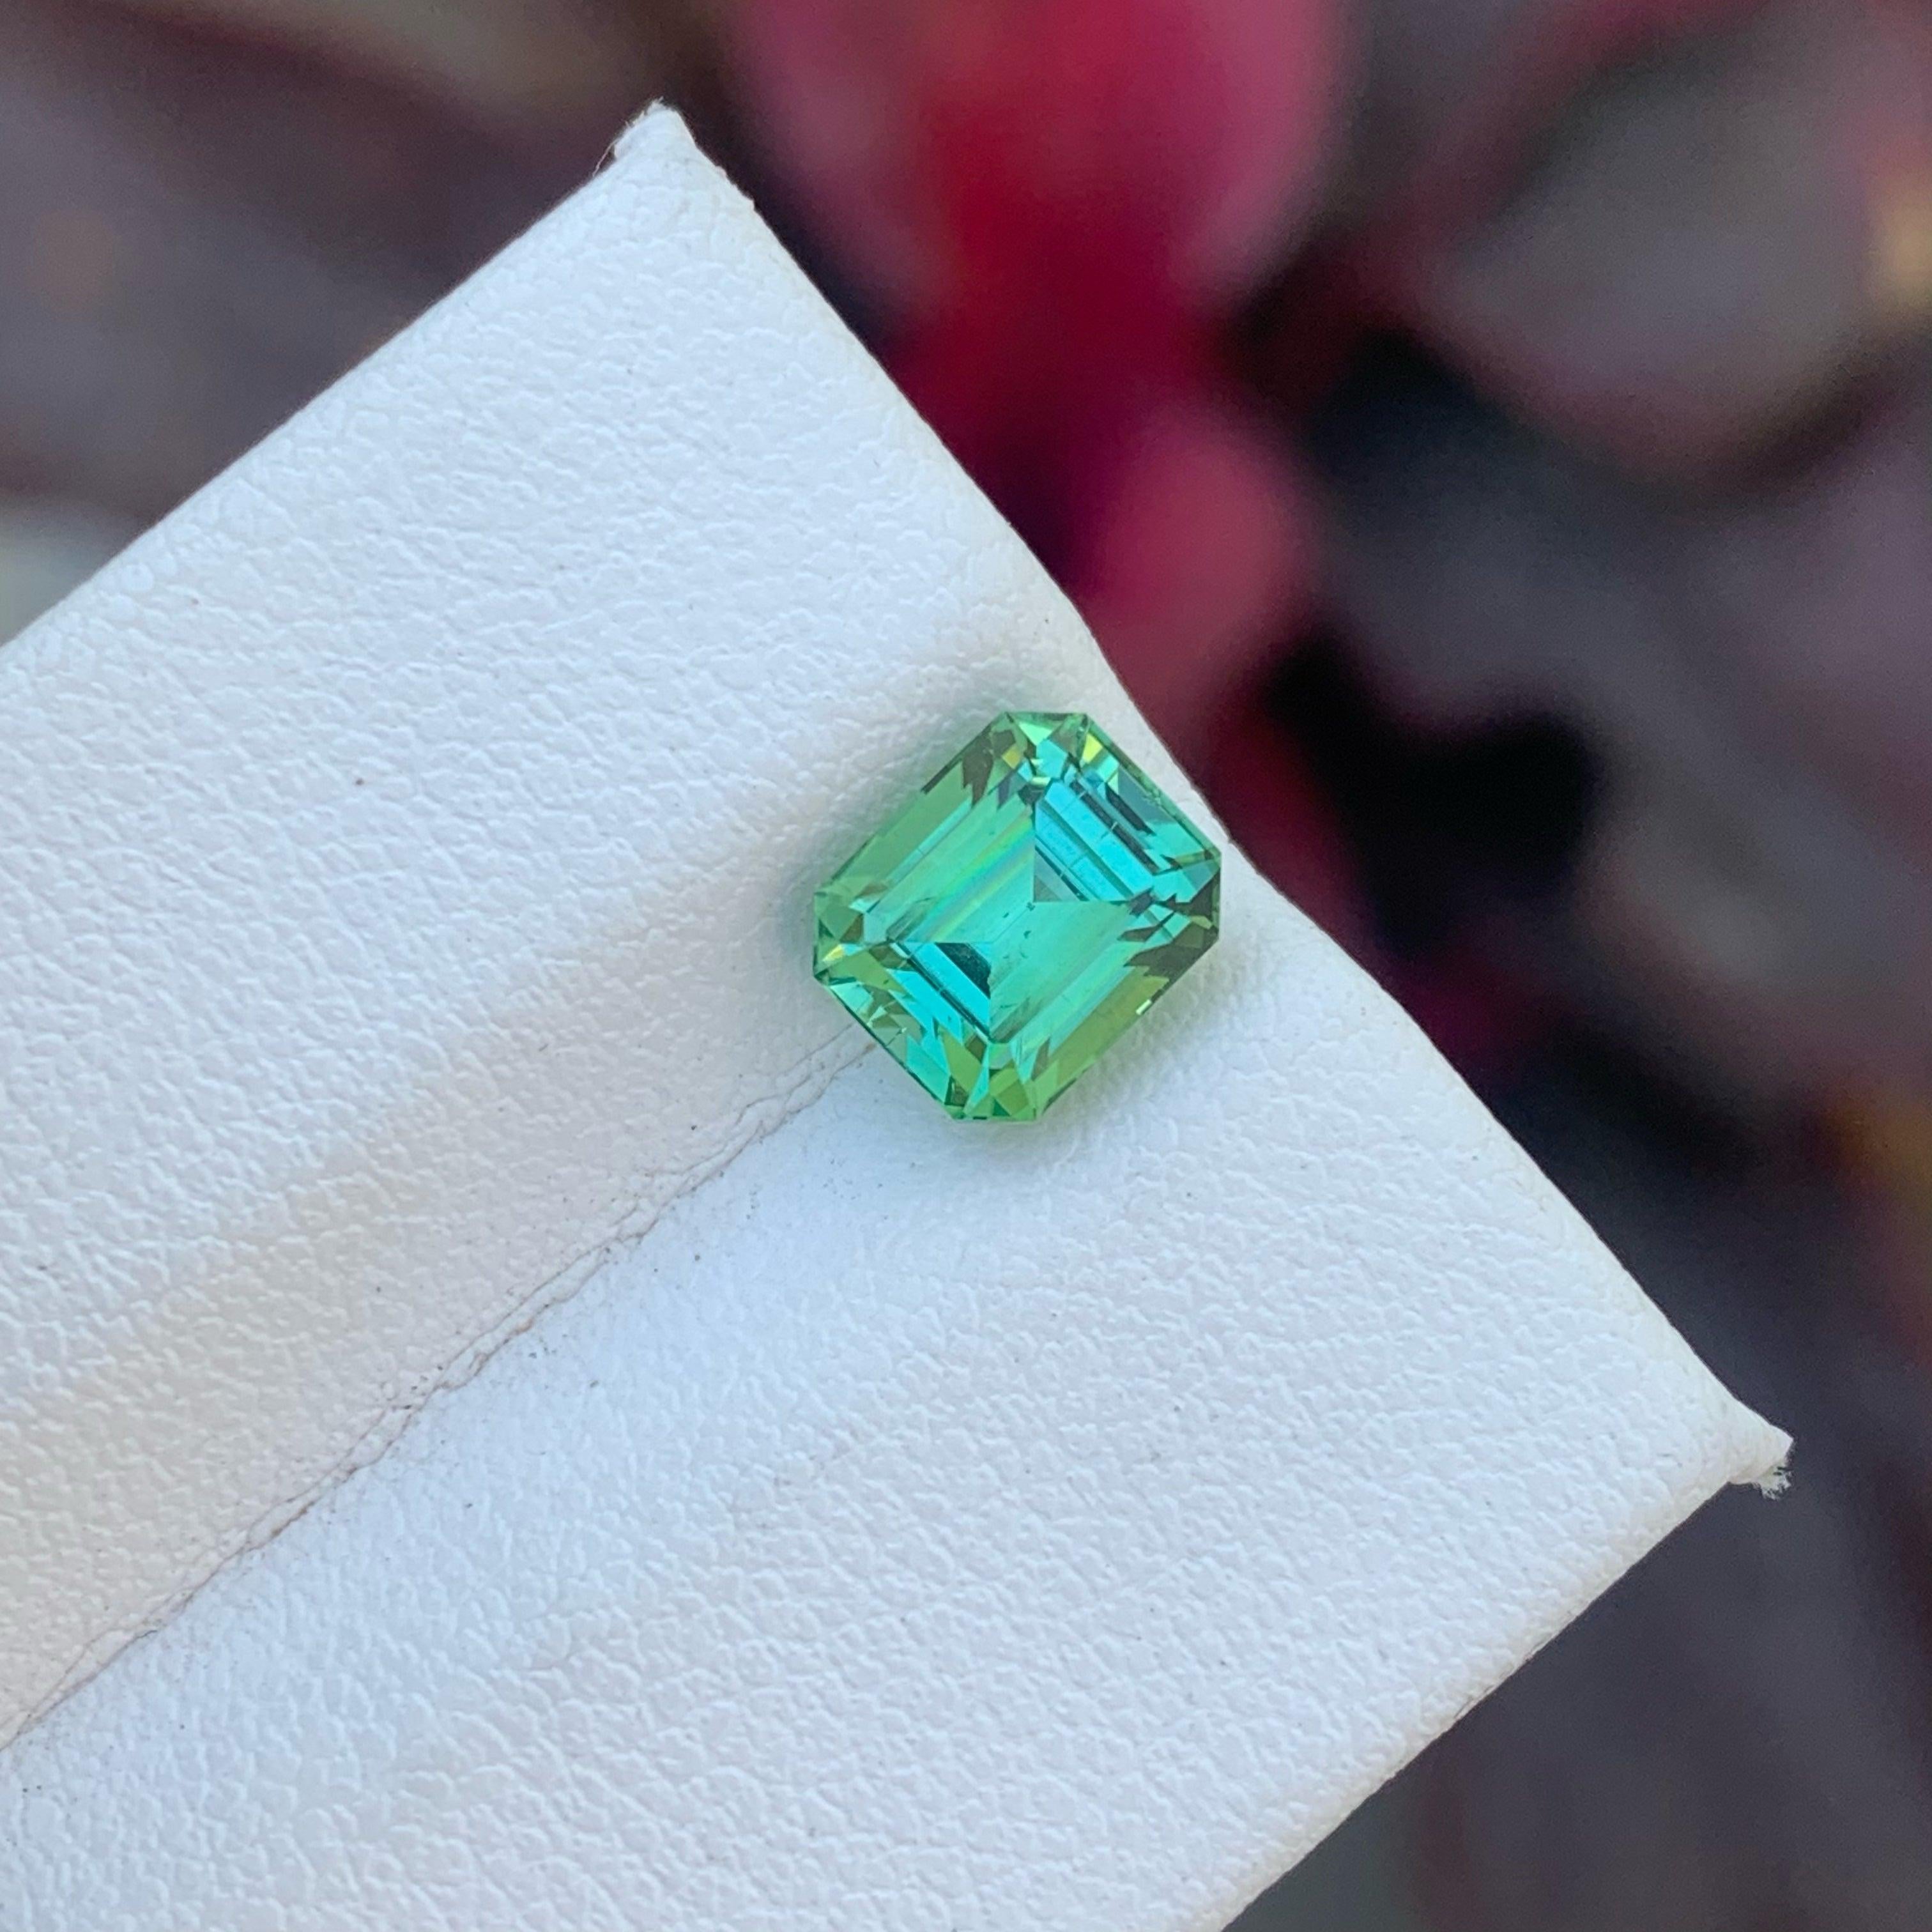 Spectacular Mint Green Tourmaline, Available For Sale At Wholesale Price Natural High Quality 1.85 Carats Loupe Clean Clarity Untreated Tourmaline From Afghanistan.

Product Information:

GEMSTONE TYPE: Spectacular Mint Green Tourmaline
WEIGHT: 1.85